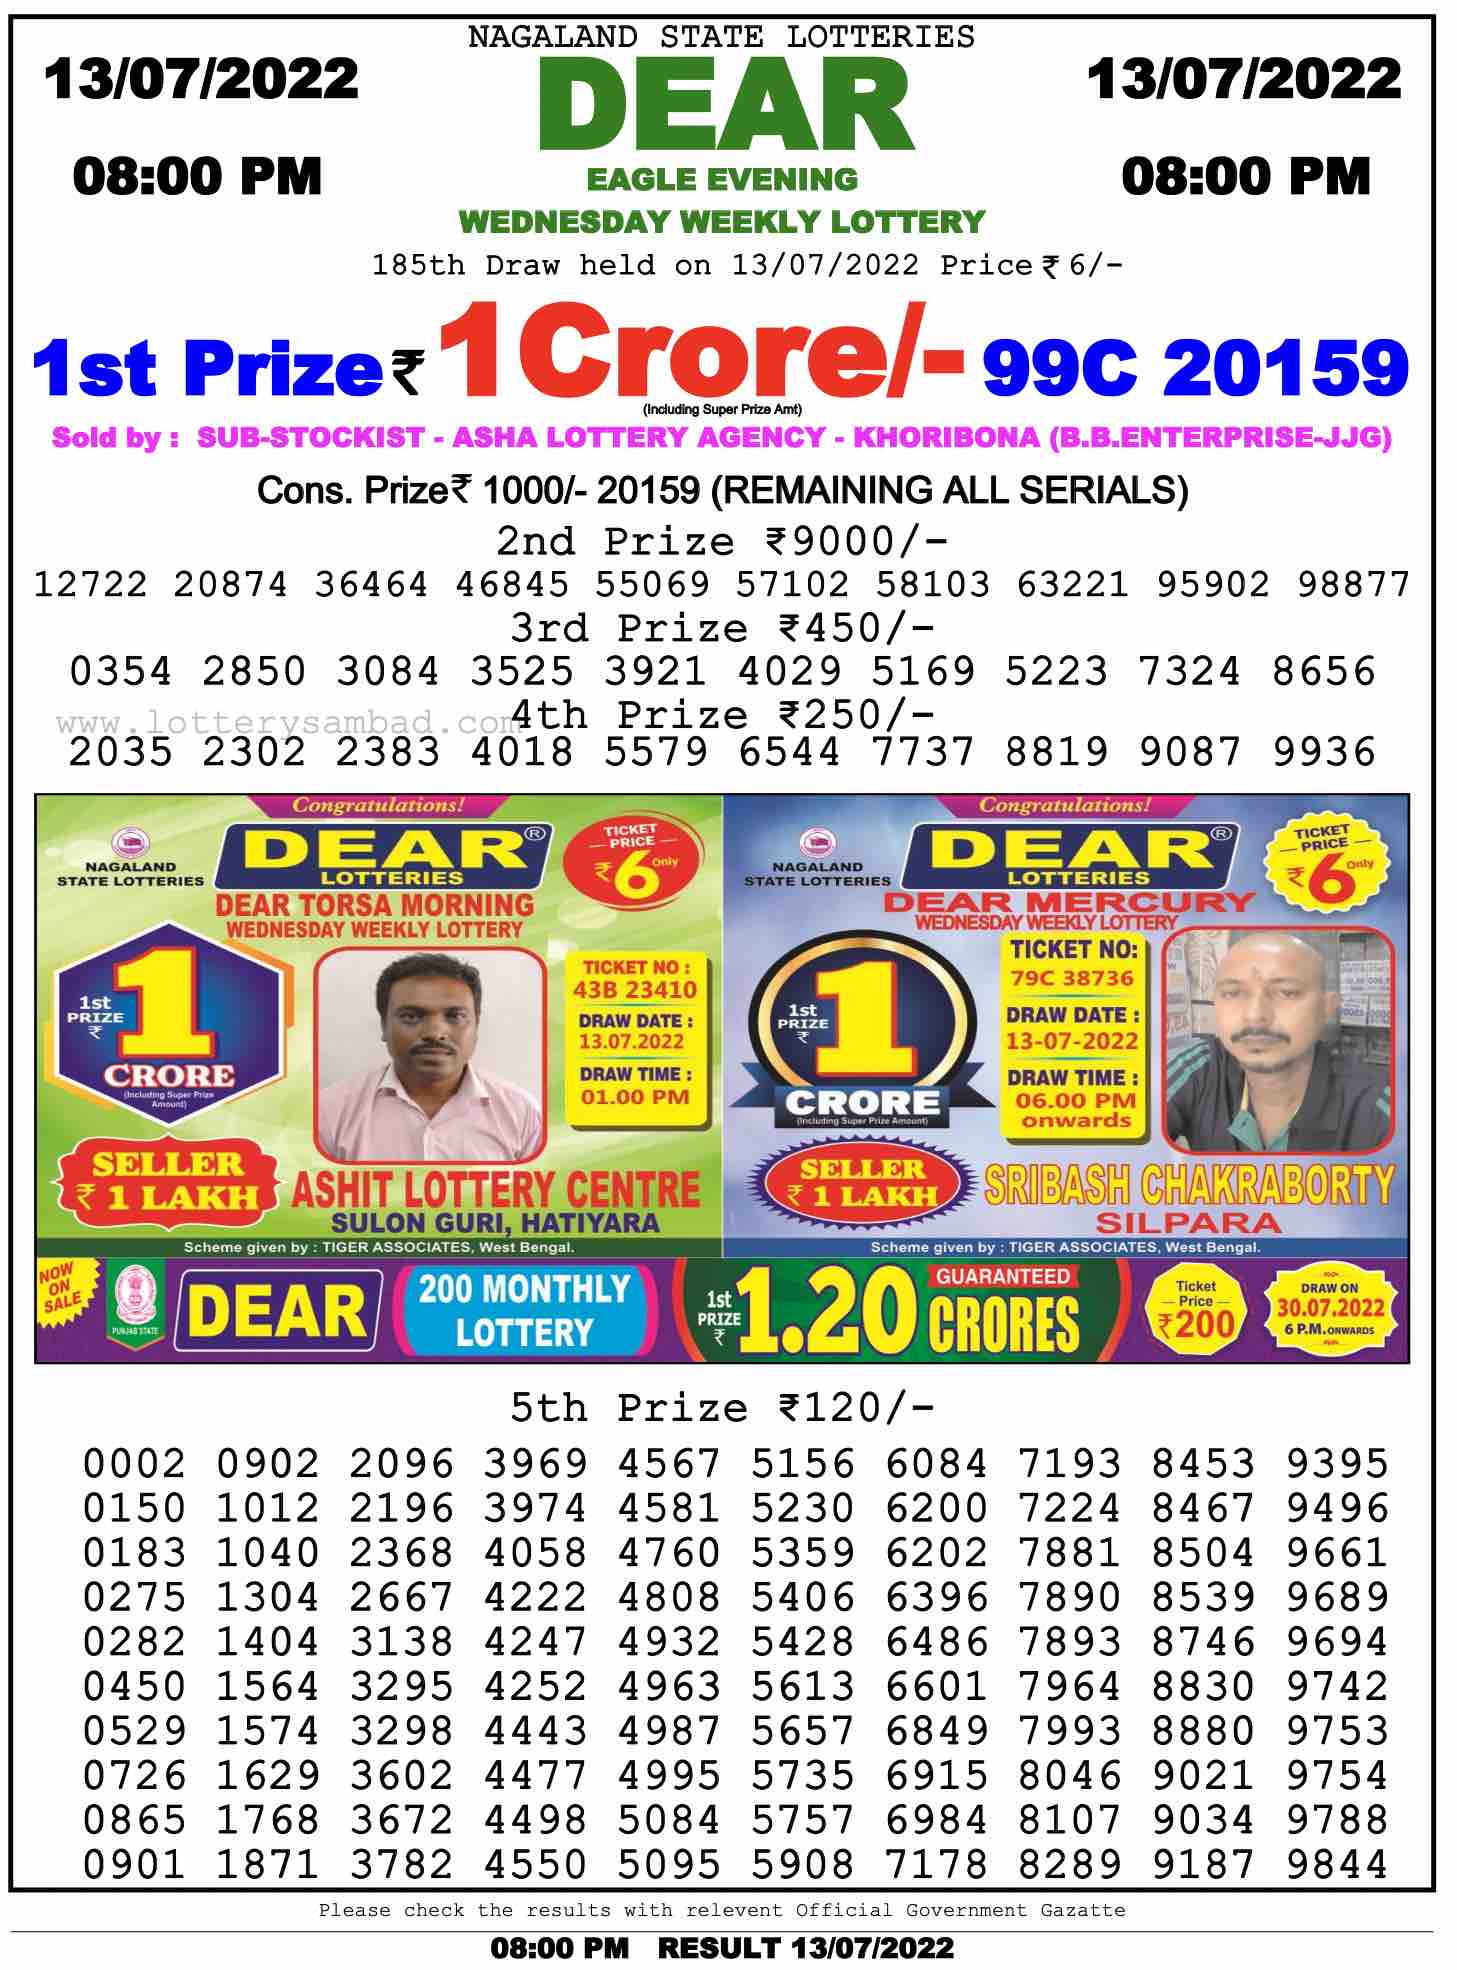 Download Result of Nagaland State Dear 6 Draw 13-07-2022 Draw at 8:00Pm